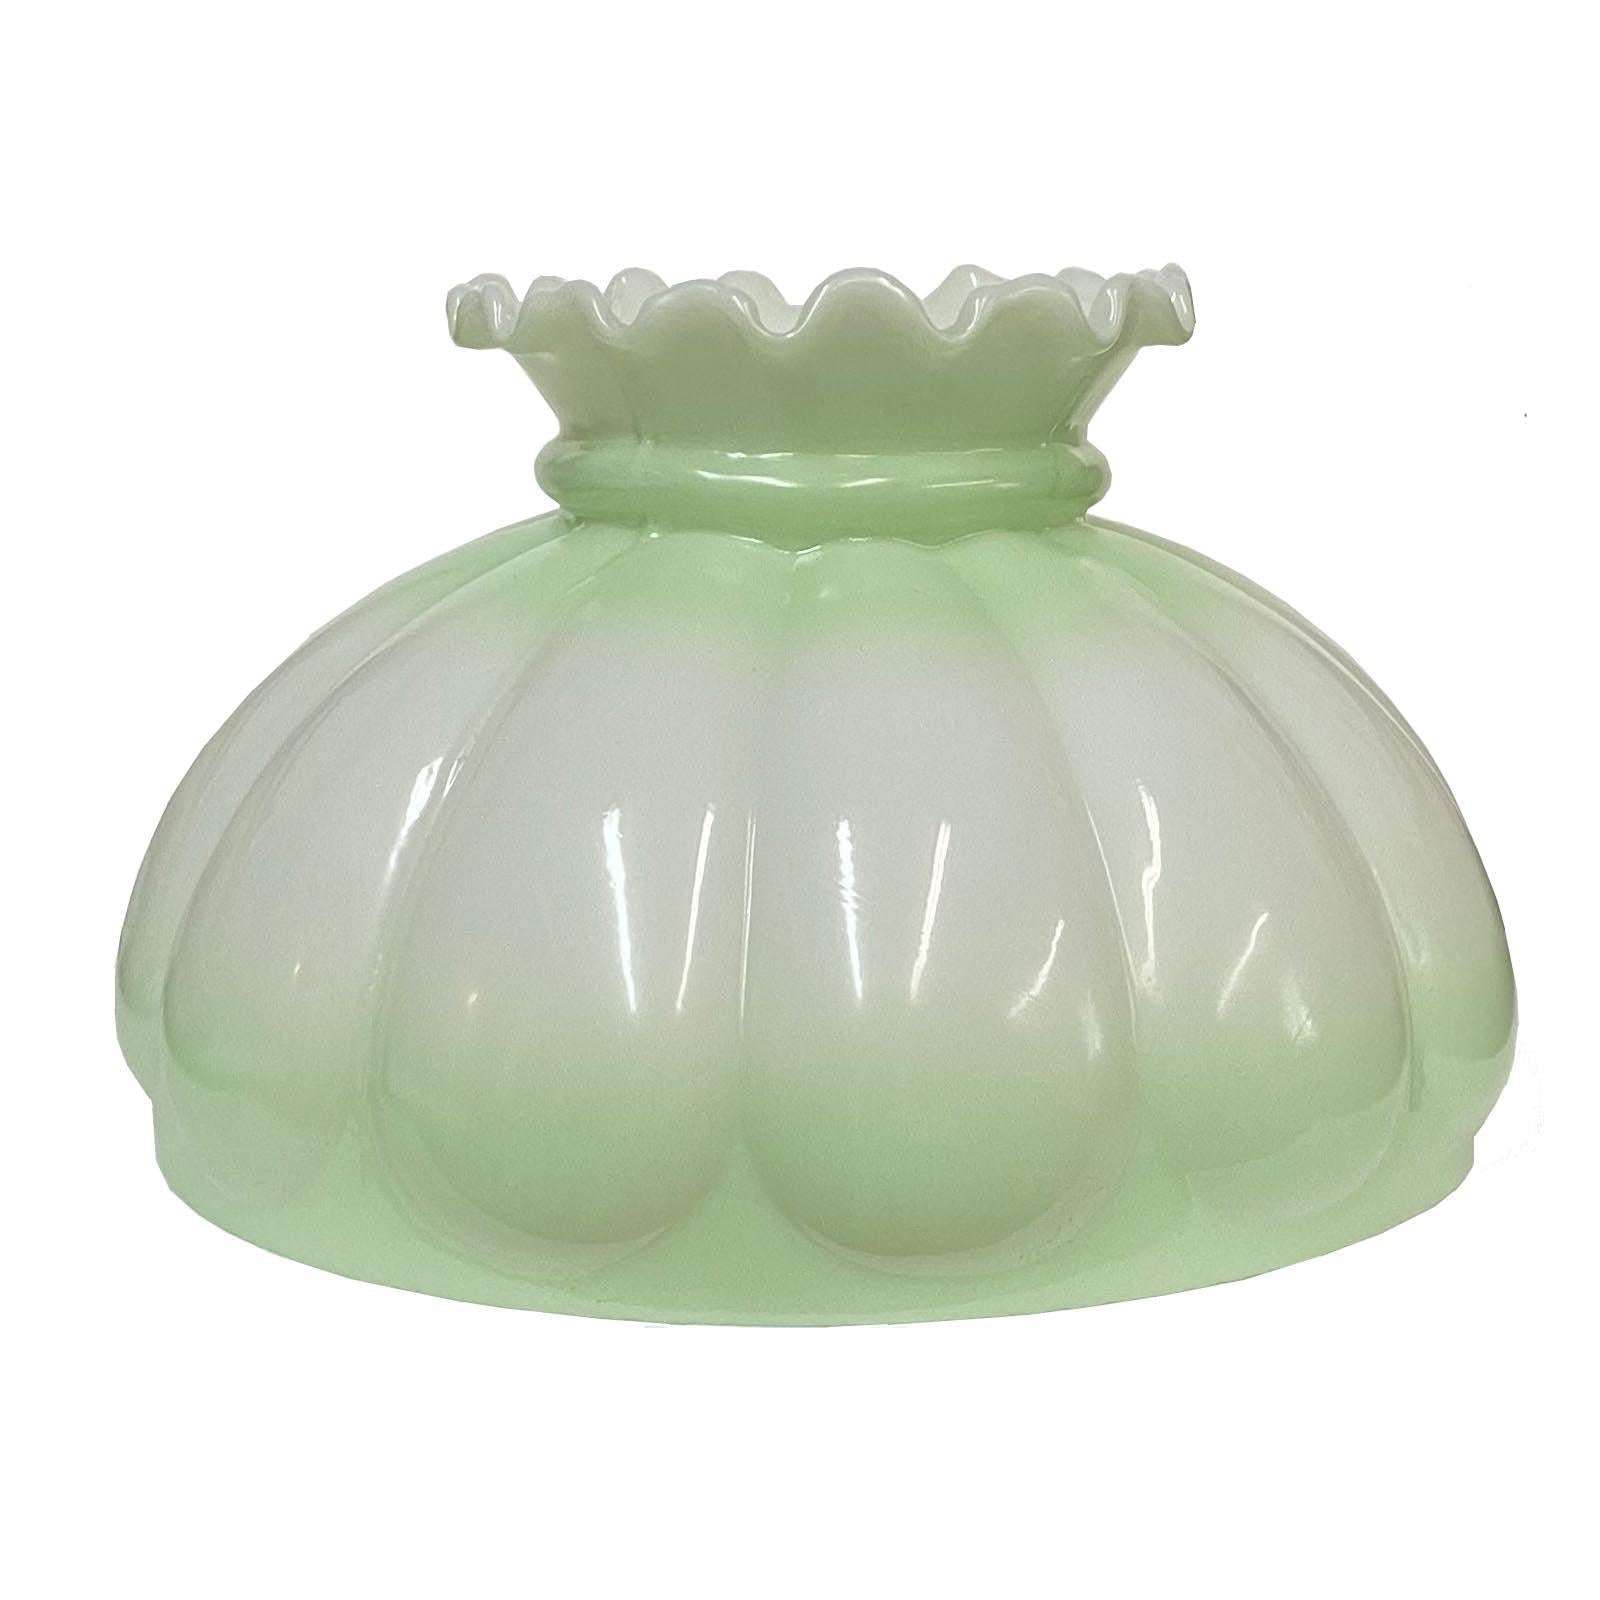 10" Oil Lamp Shade, white with green tint